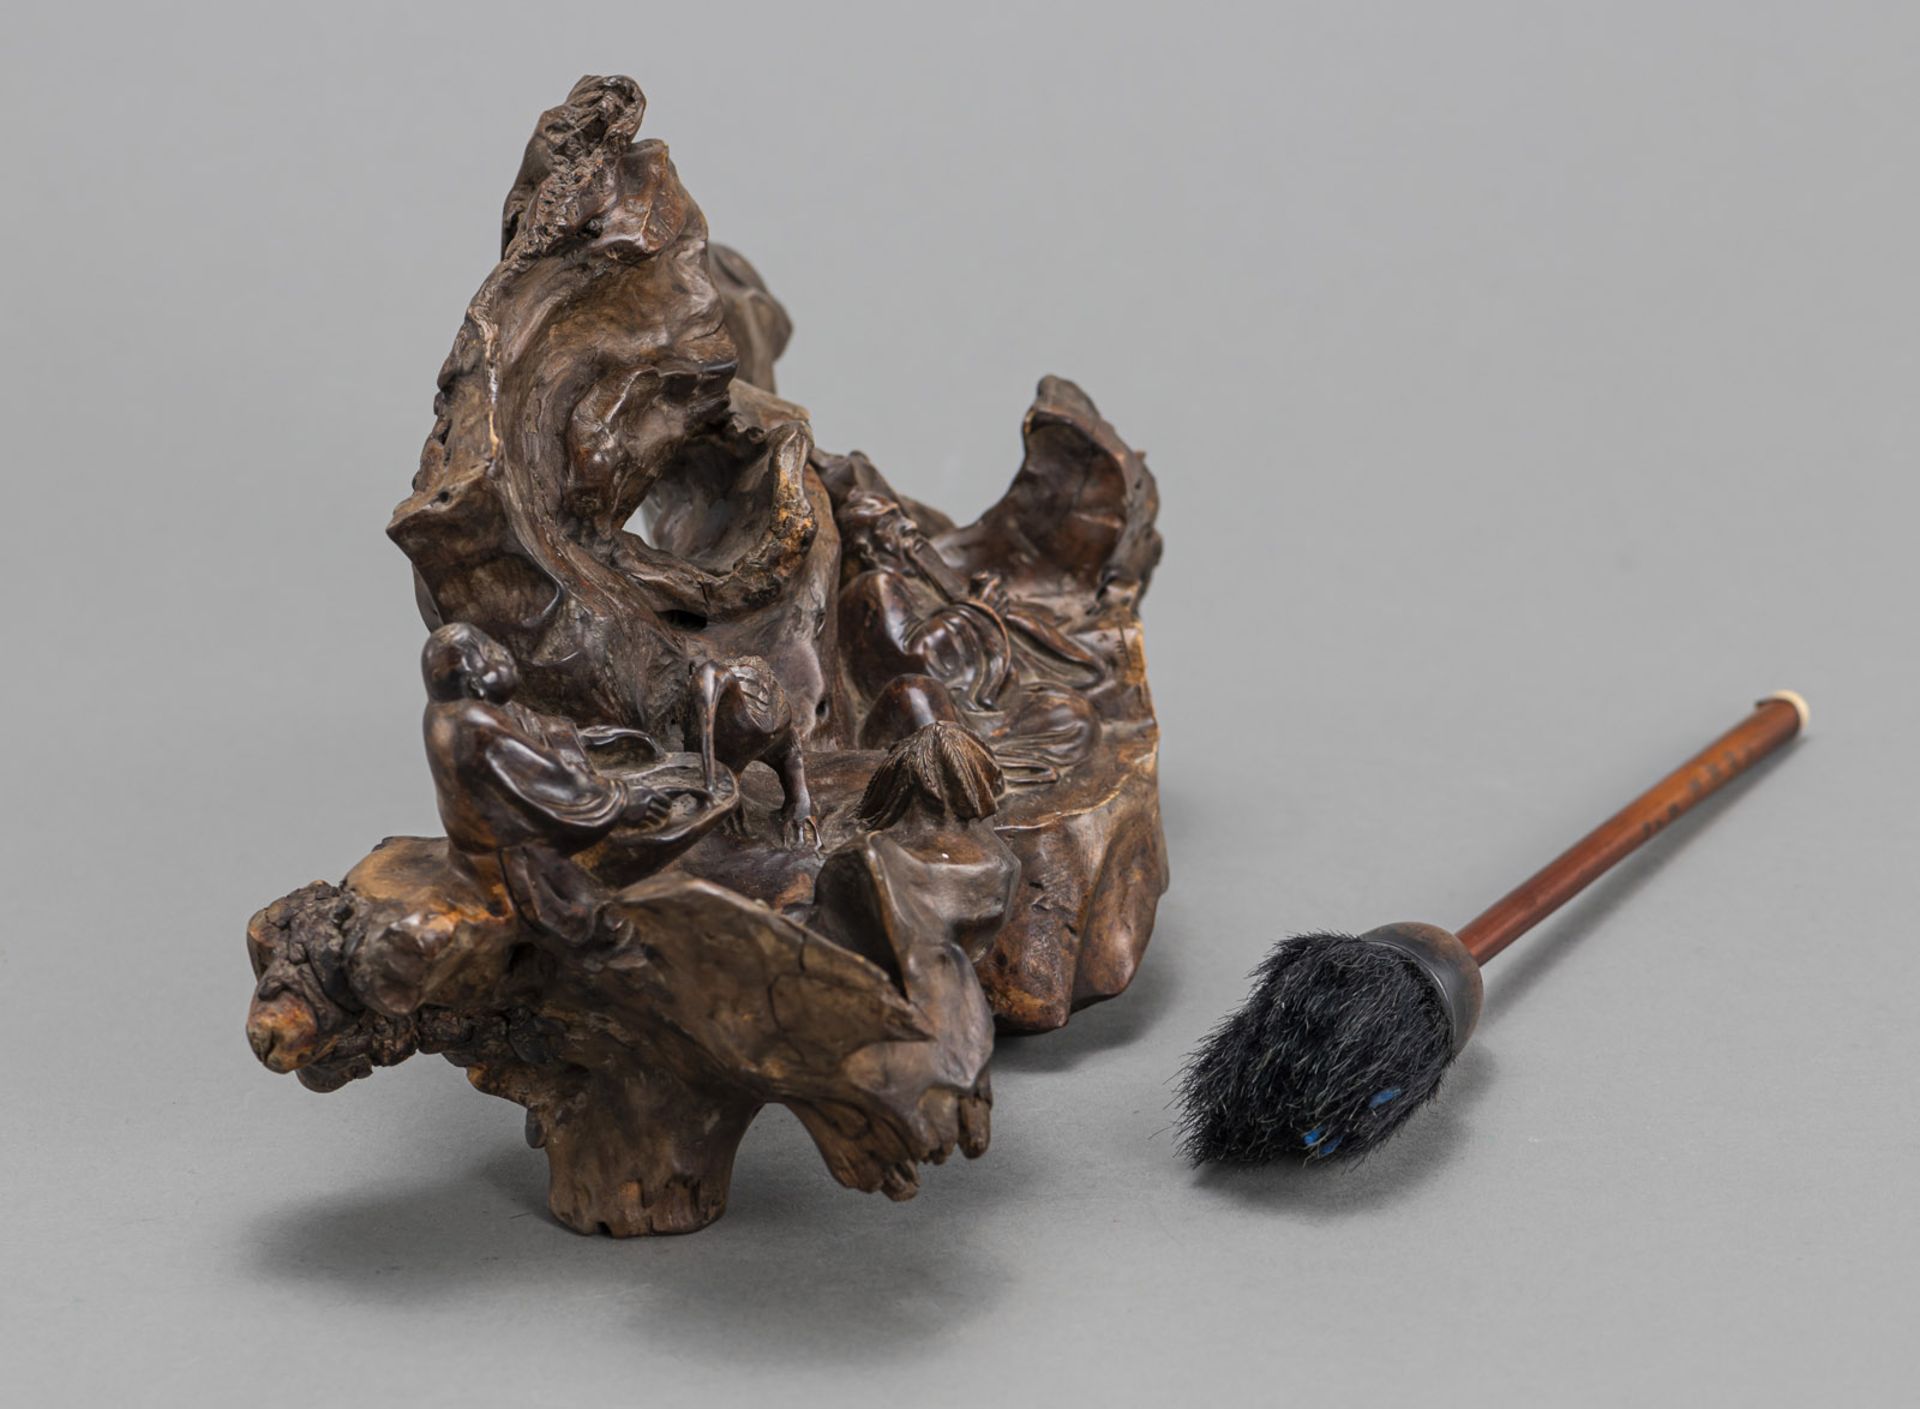 A CARVED WOOD BRUSH HOLDER SHOWING A SCHOLAR IN THE GARDEN, AND A BRUSH - Image 2 of 3